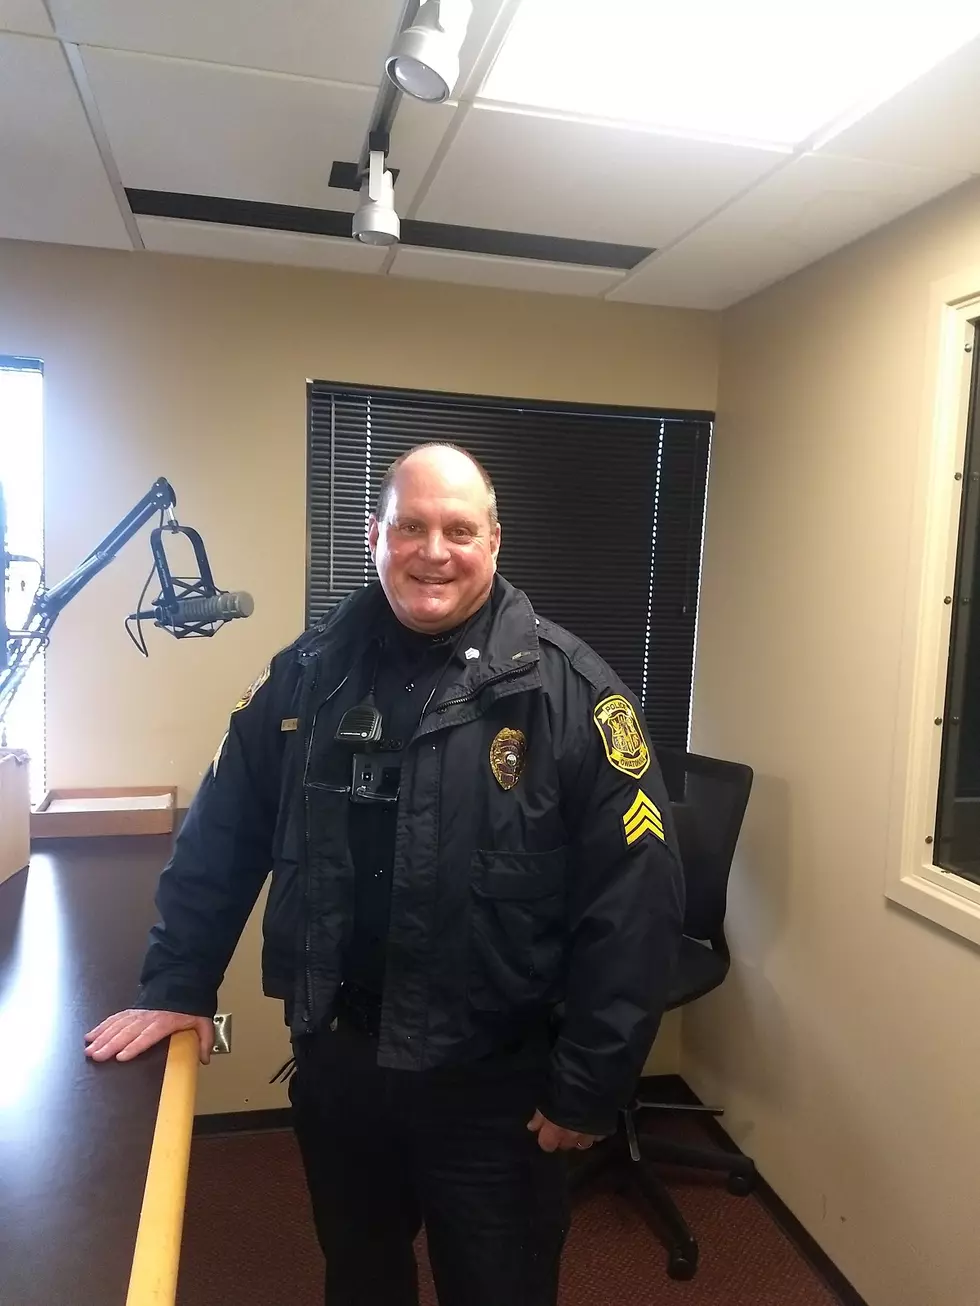 After 29 Years in Law Enforcement, Sgt. Rob Kniefel is Retiring